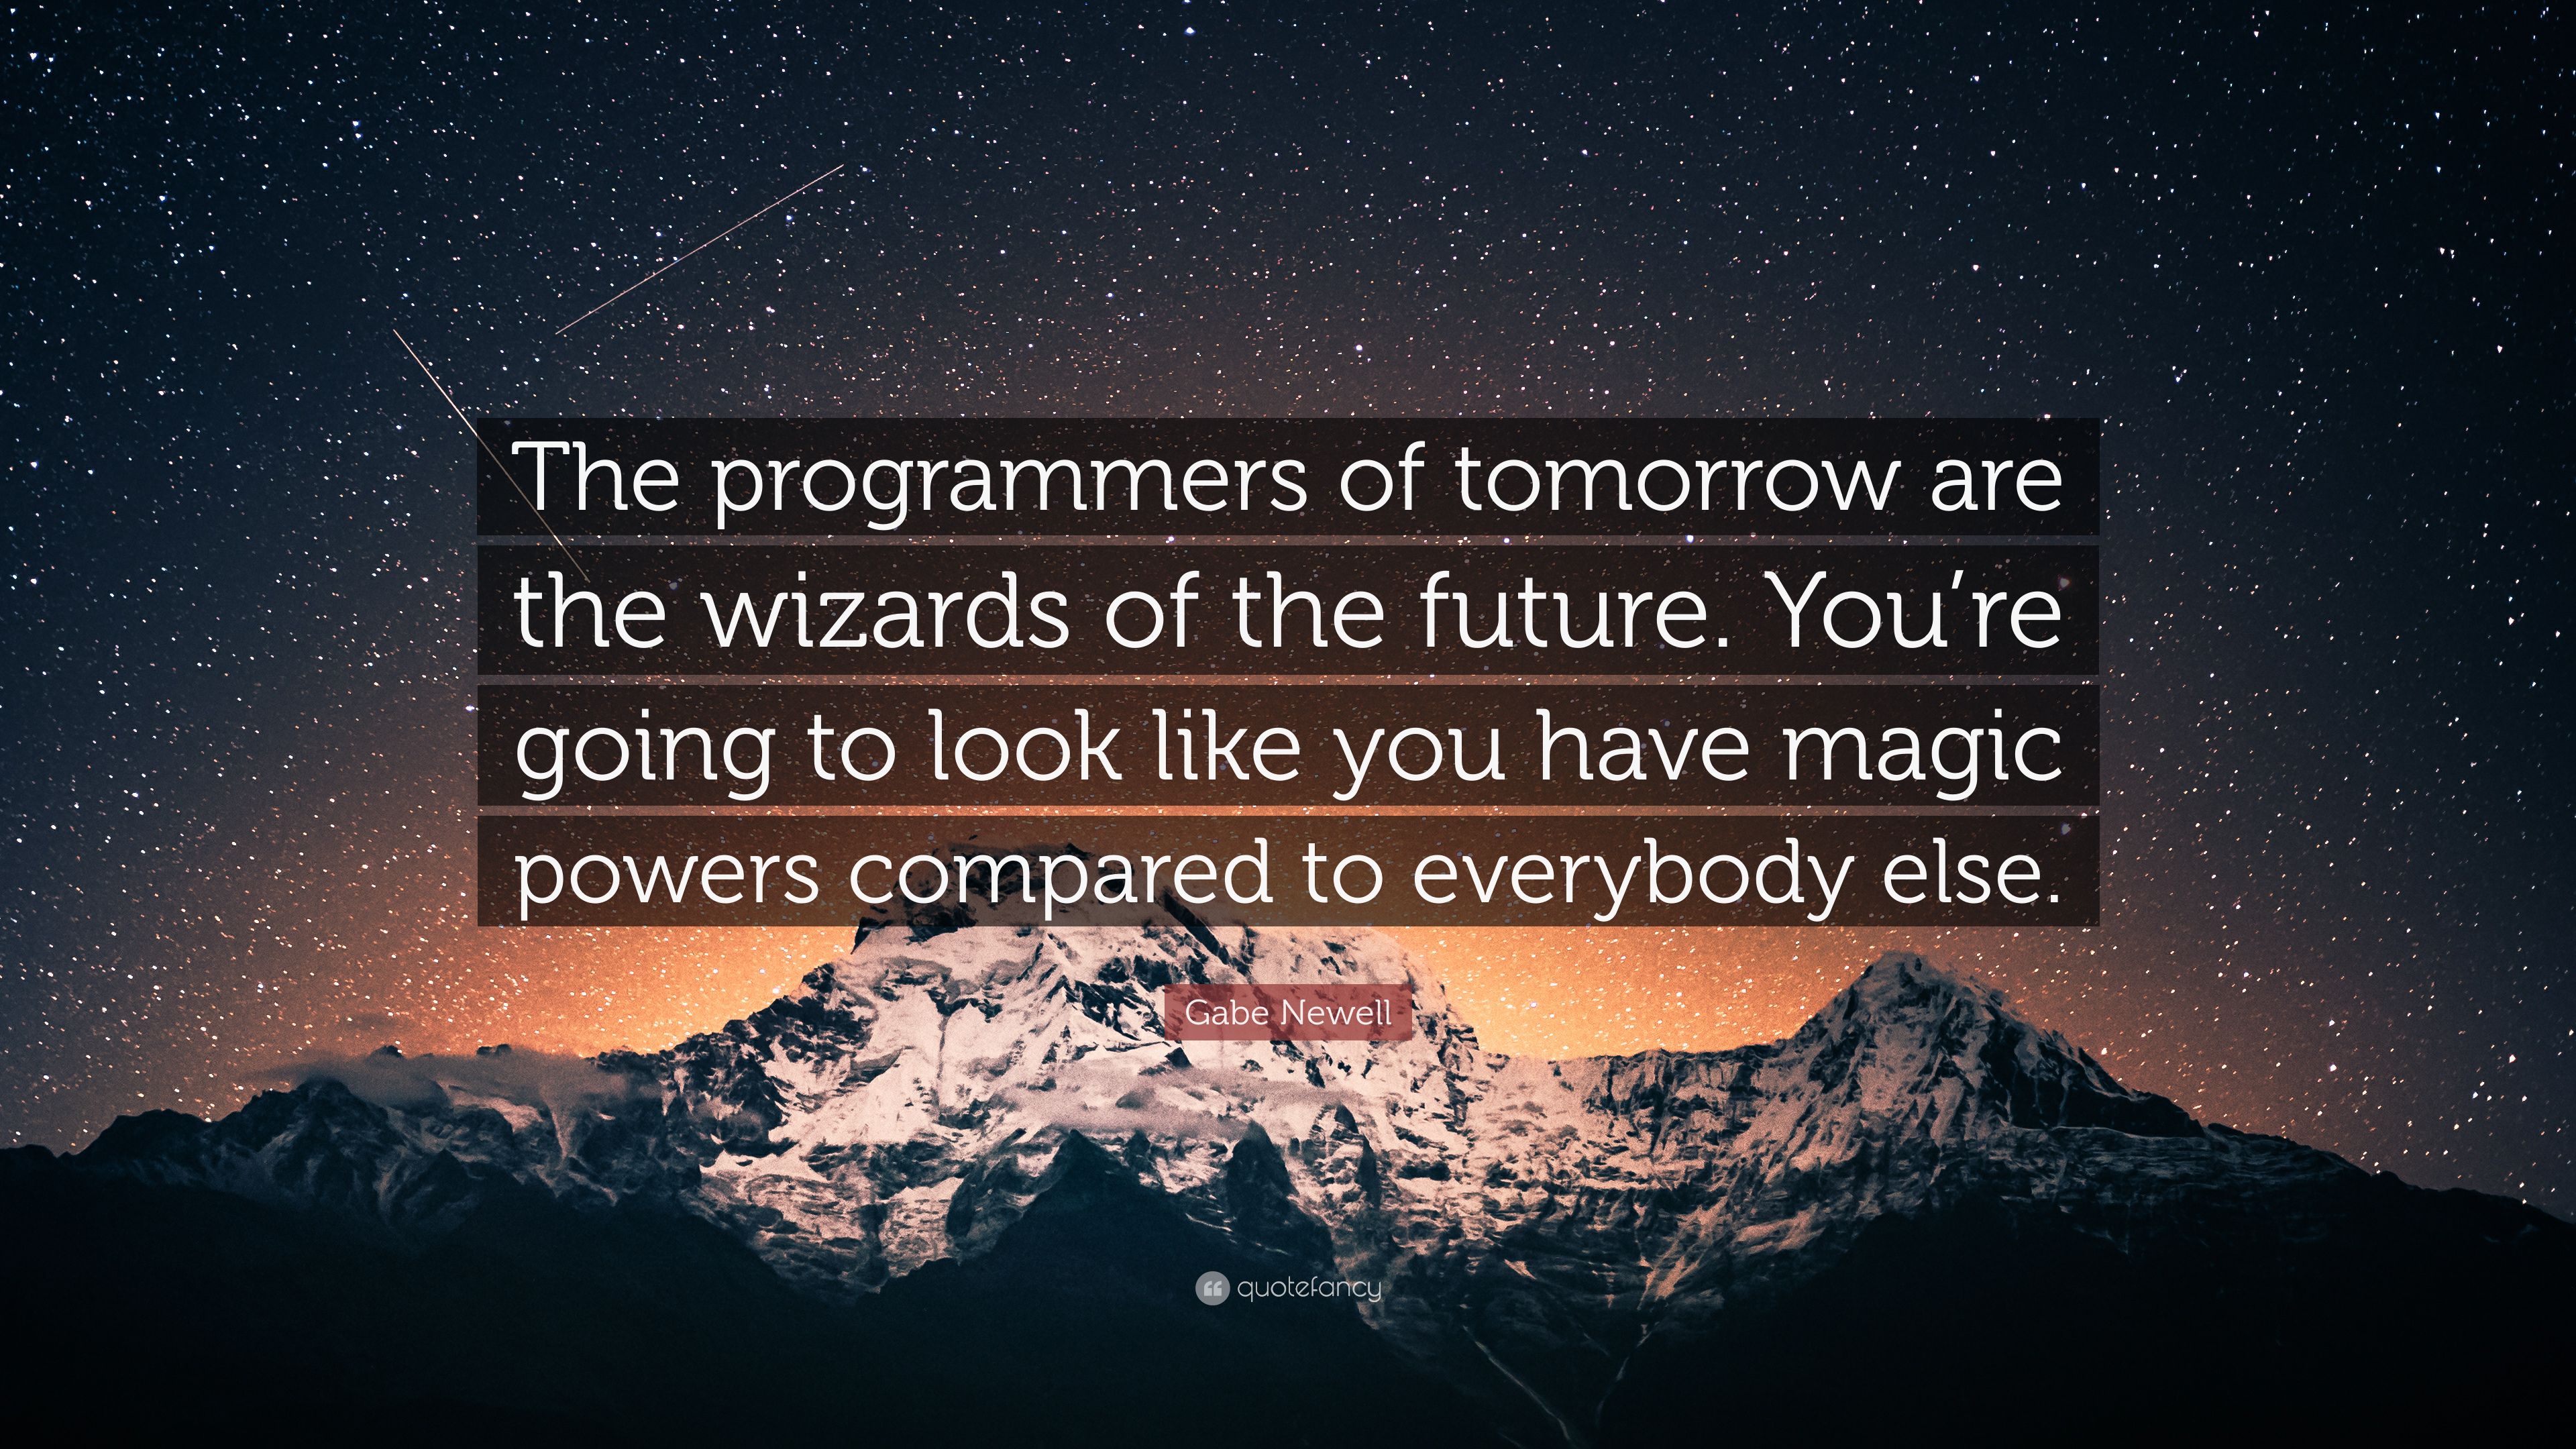 Gabe Newell Quote: “The programmers of tomorrow are the wizards